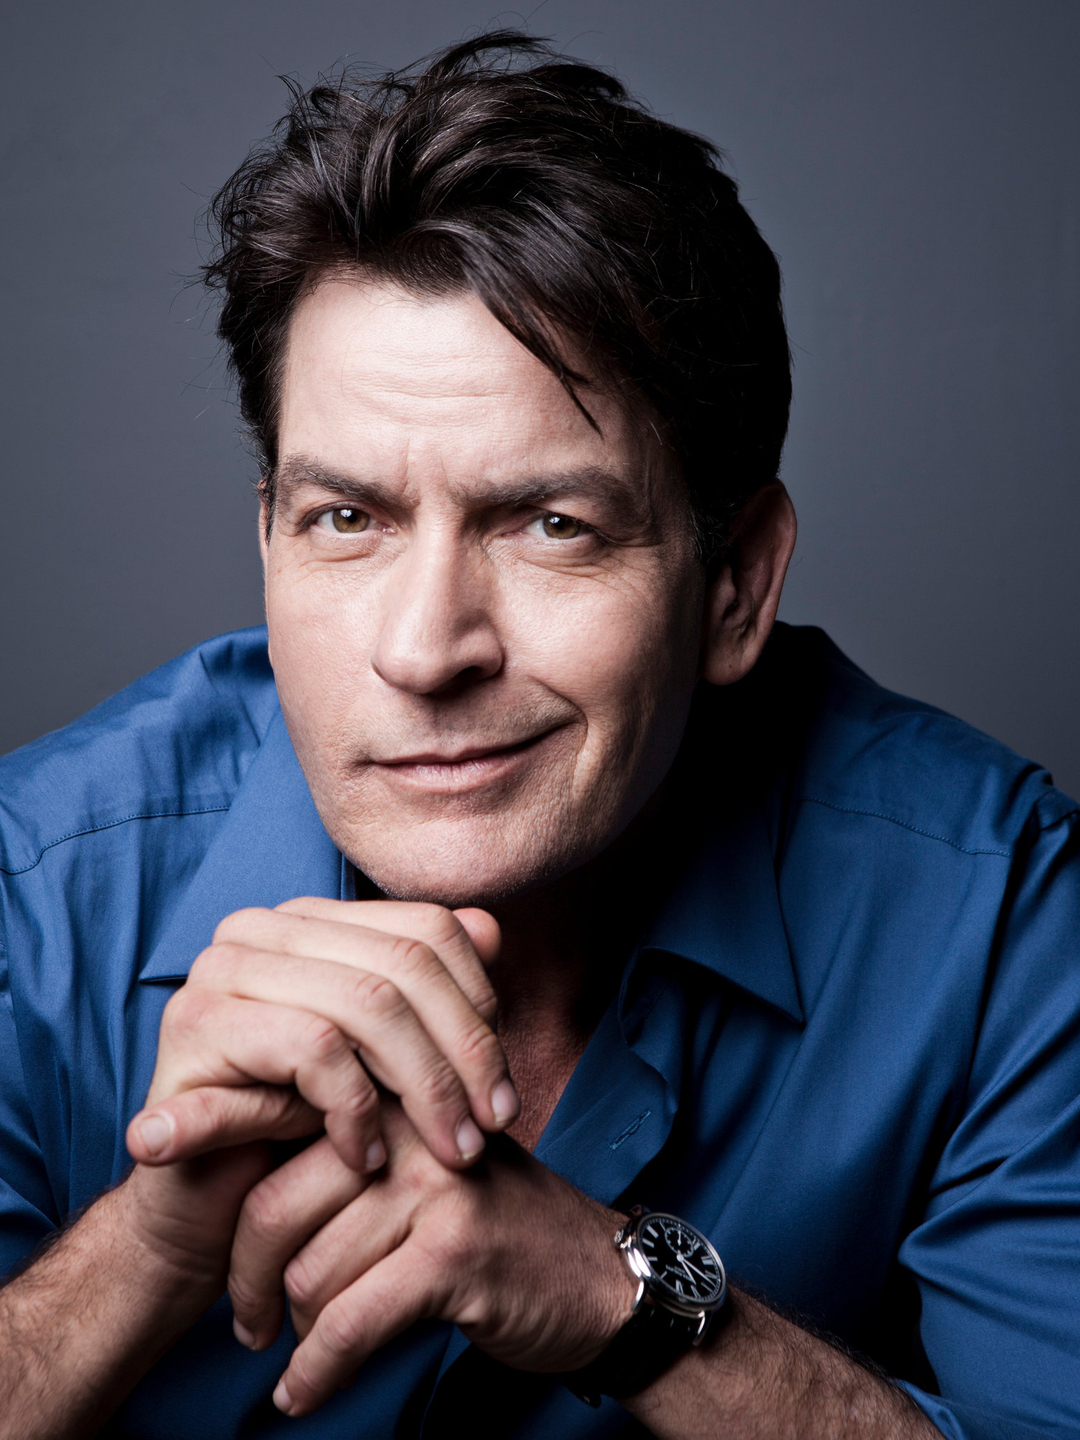 Charlie Sheen early life